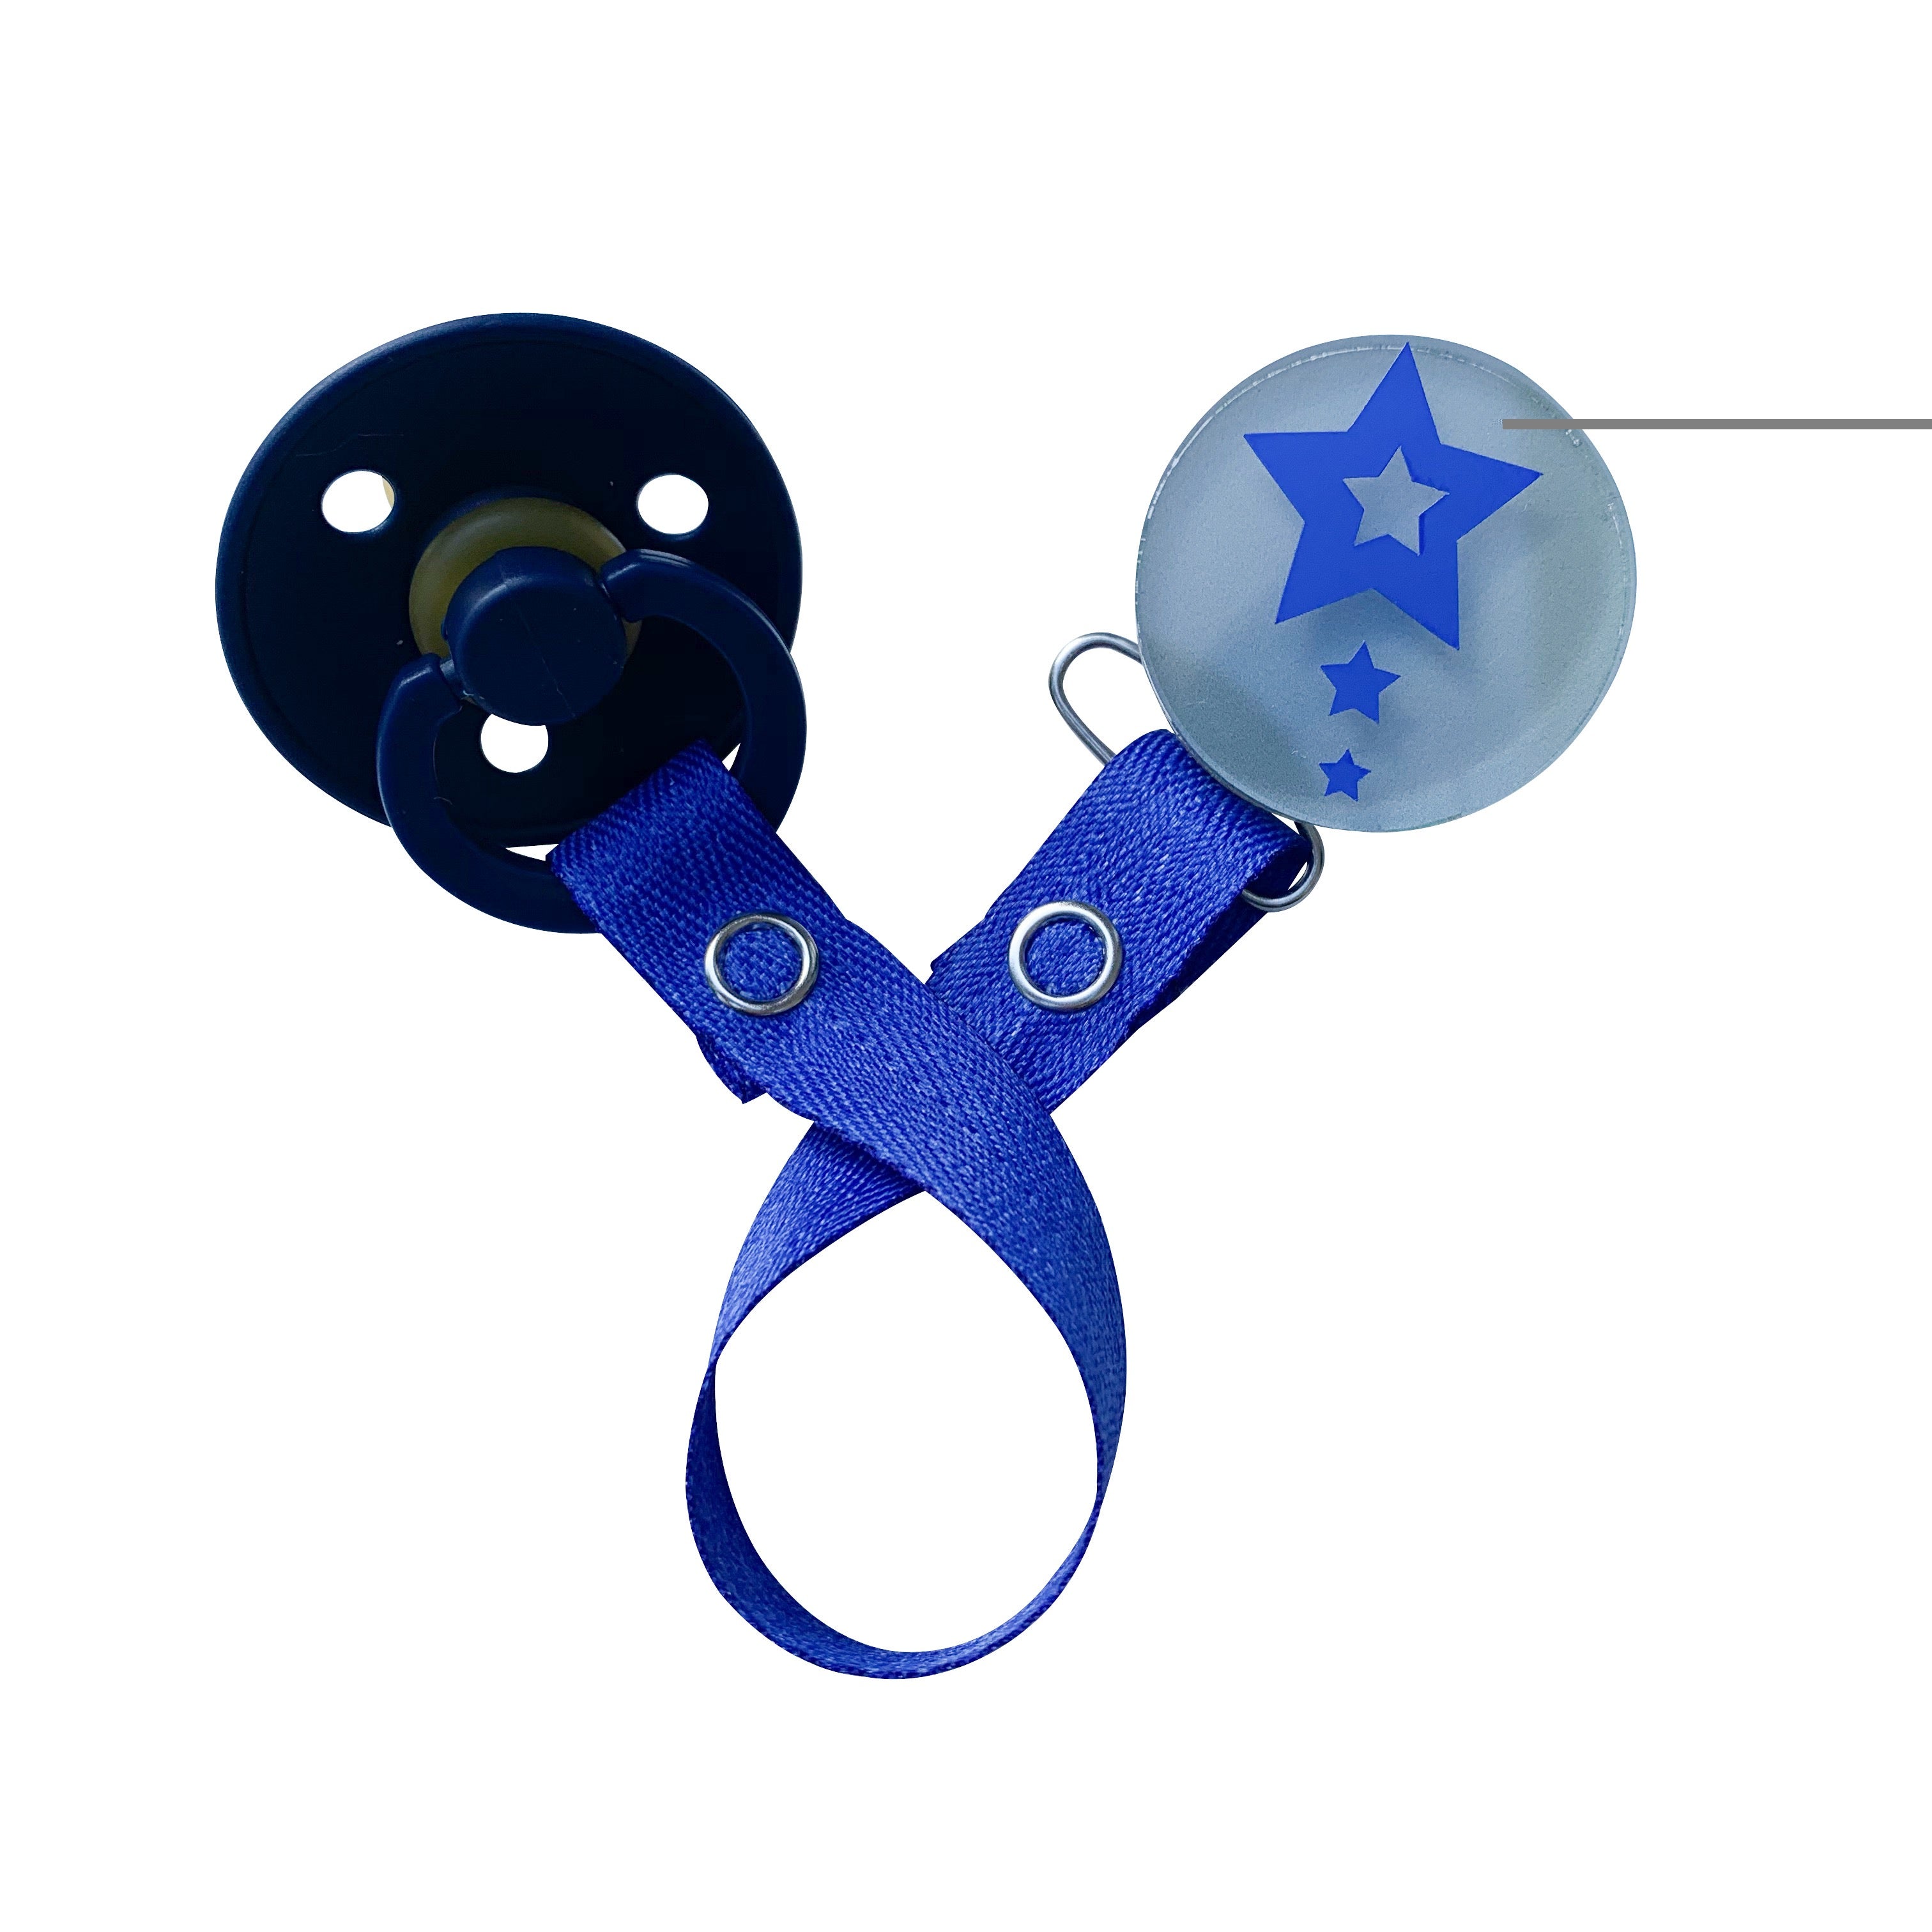 Classy Paci VIVID Shooting stars design in several color options clip with matching Bibs pacifier GIFT SET